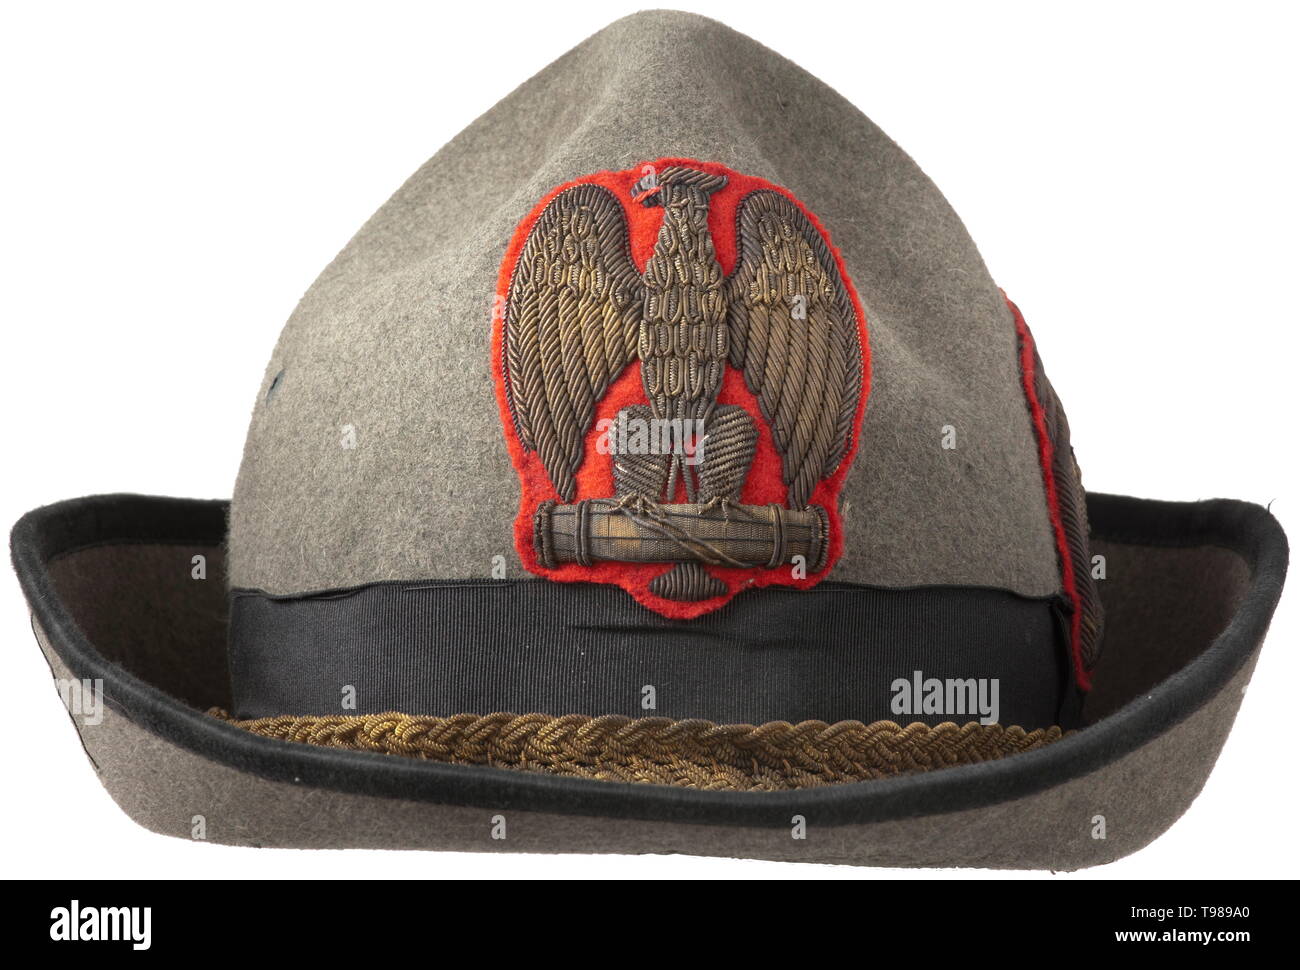 A head gear of "Alpini" type, issued after 1923 for a general of the  M.V.S.N. Grey-green cotton cloth, with lateral brim, golden hat cord,  hand-embroidered eagle with fasces in the talons, gold